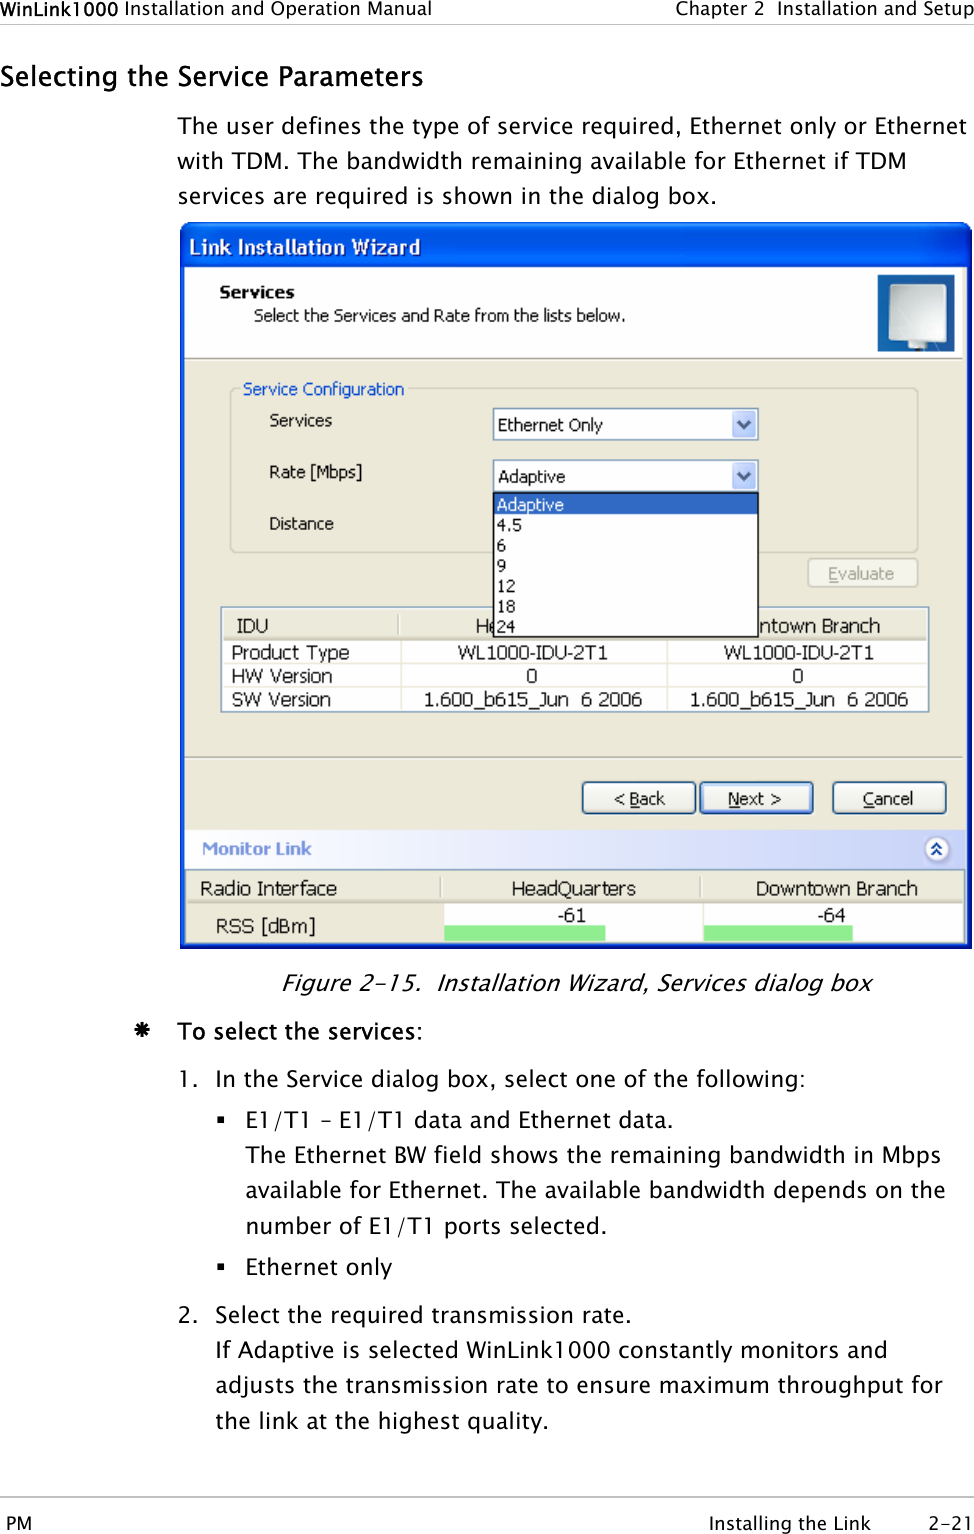 WinLink1000 Installation and Operation Manual  Chapter  2  Installation and Setup Selecting the Service Parameters The user defines the type of service required, Ethernet only or Ethernet with TDM. The bandwidth remaining available for Ethernet if TDM services are required is shown in the dialog box.  Figure  2-15.  Installation Wizard, Services dialog box Æ To select the services: 1. In the Service dialog box, select one of the following:  E1/T1 – E1/T1 data and Ethernet data. The Ethernet BW field shows the remaining bandwidth in Mbps available for Ethernet. The available bandwidth depends on the number of E1/T1 ports selected.  Ethernet only 2. Select the required transmission rate. If Adaptive is selected WinLink1000 constantly monitors and adjusts the transmission rate to ensure maximum throughput for the link at the highest quality.  PM  Installing the Link  2-21 